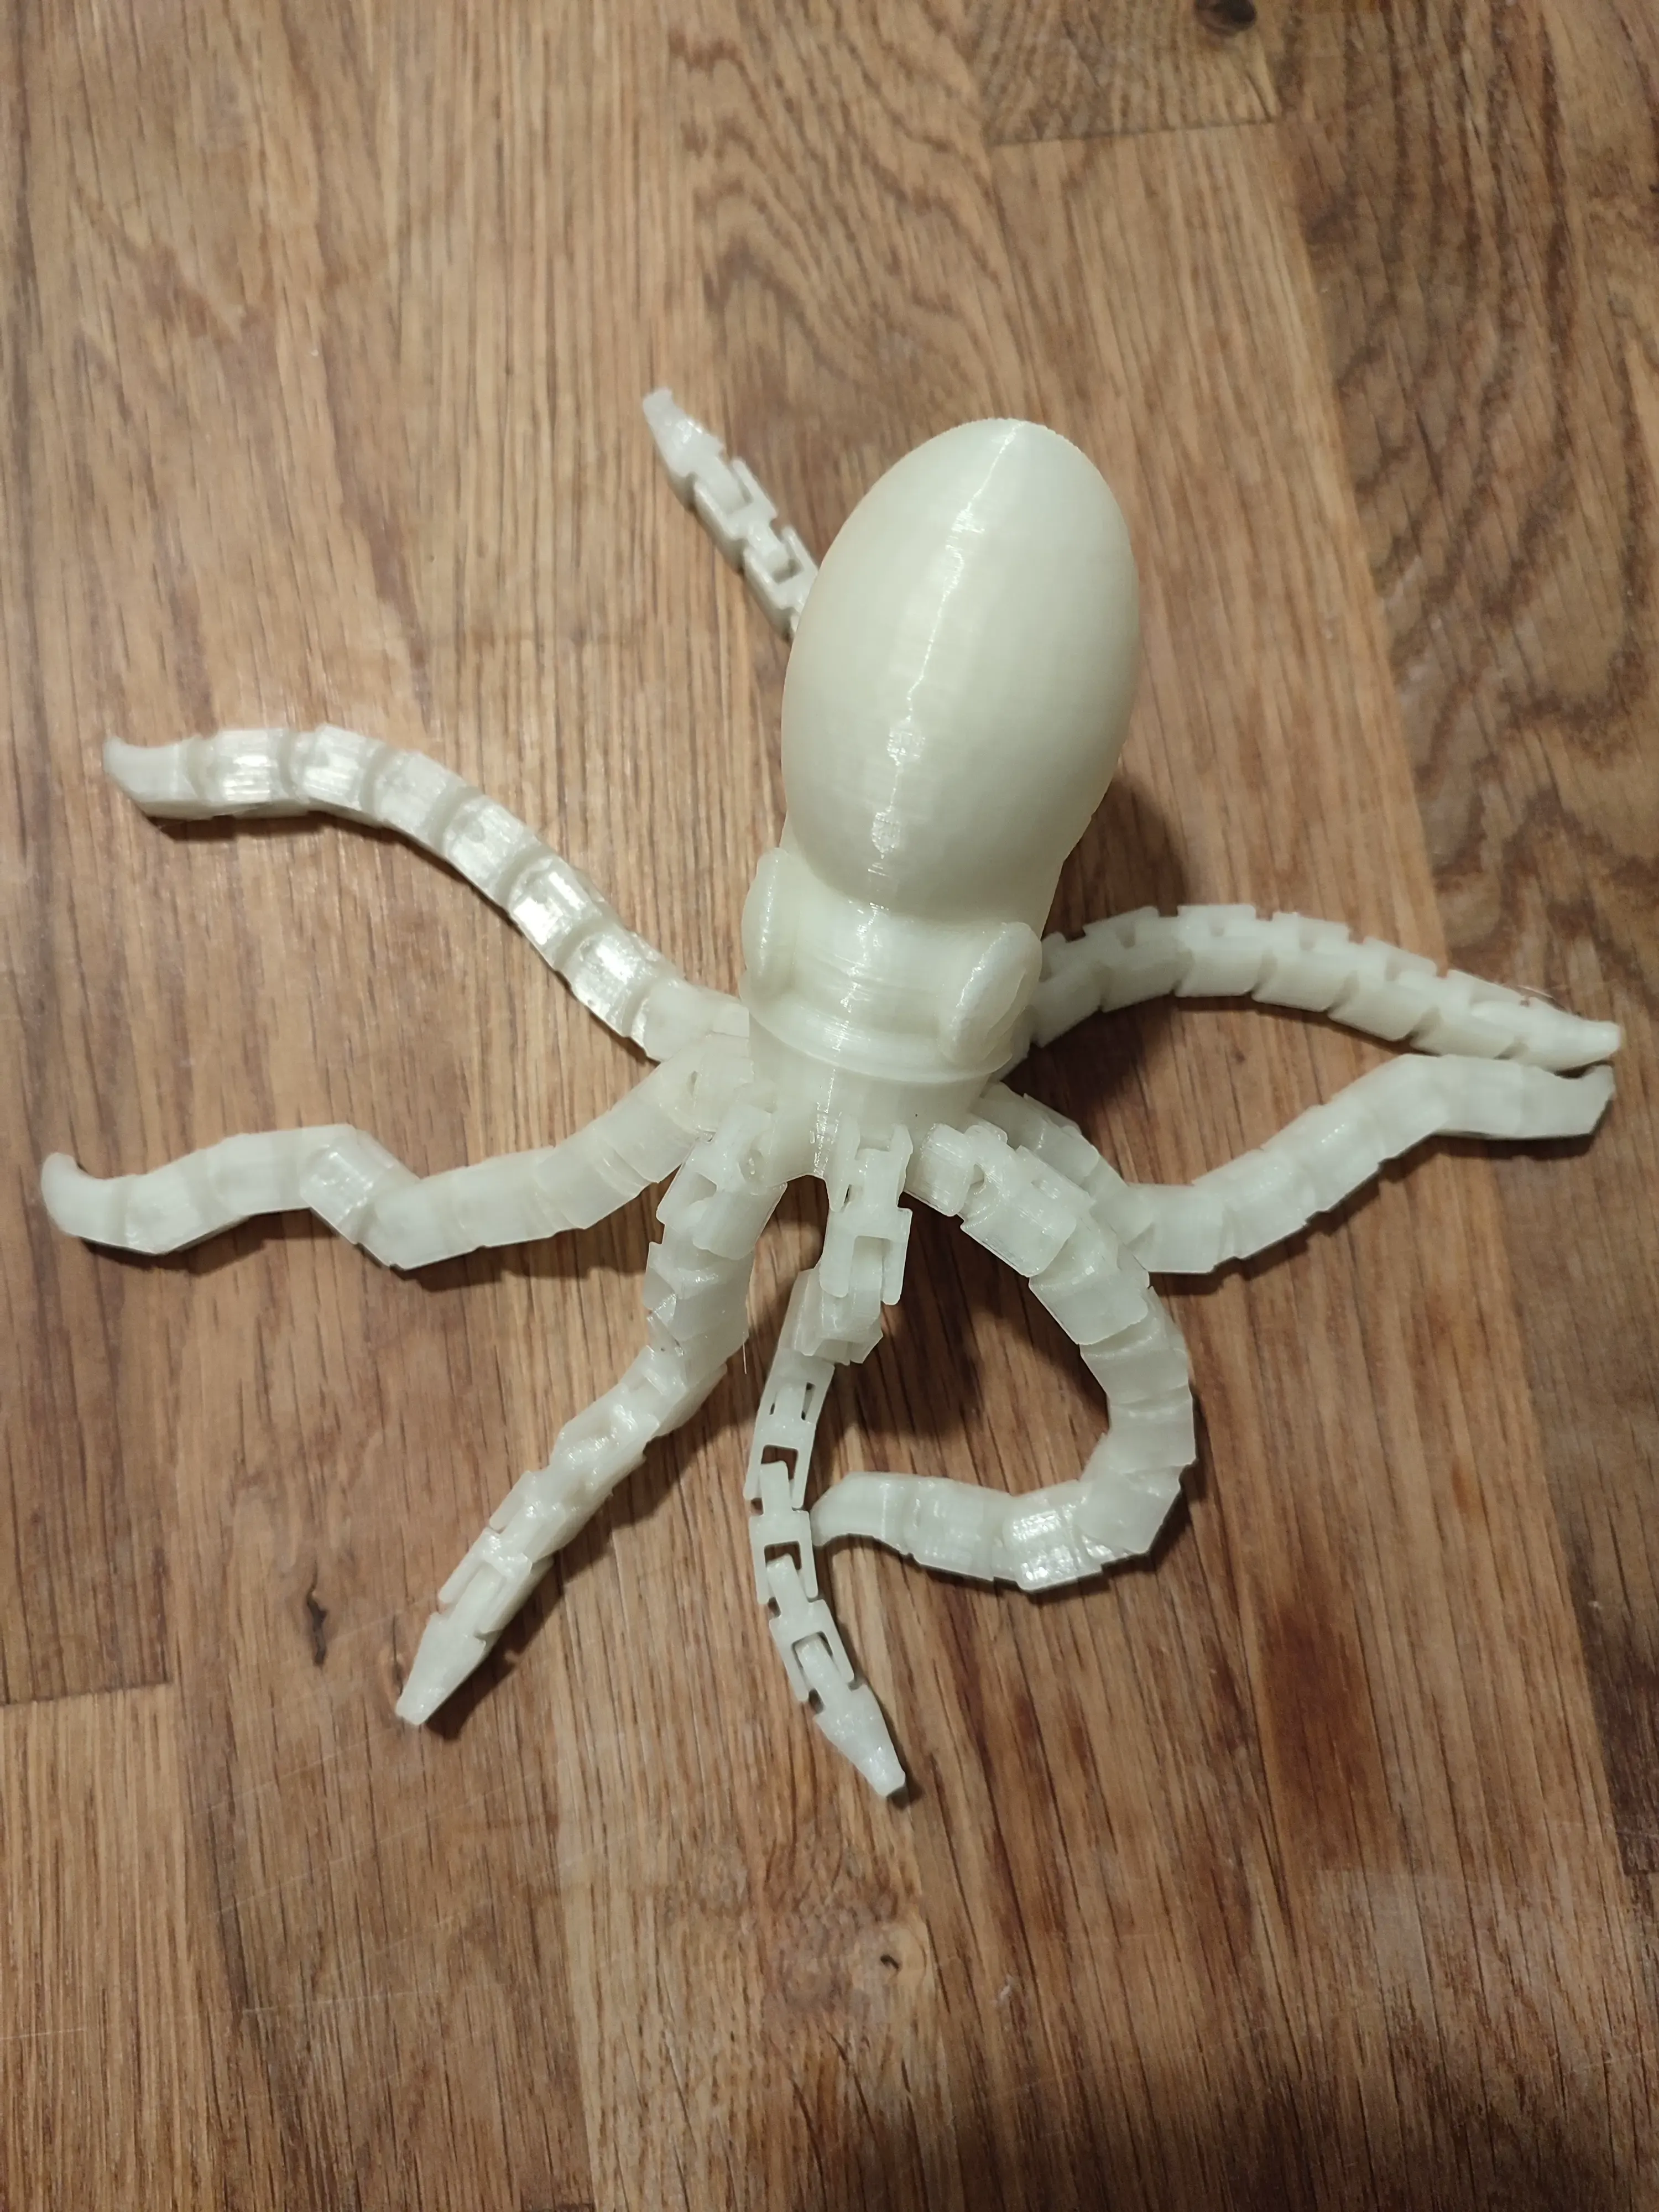 Angry Octopus articulated